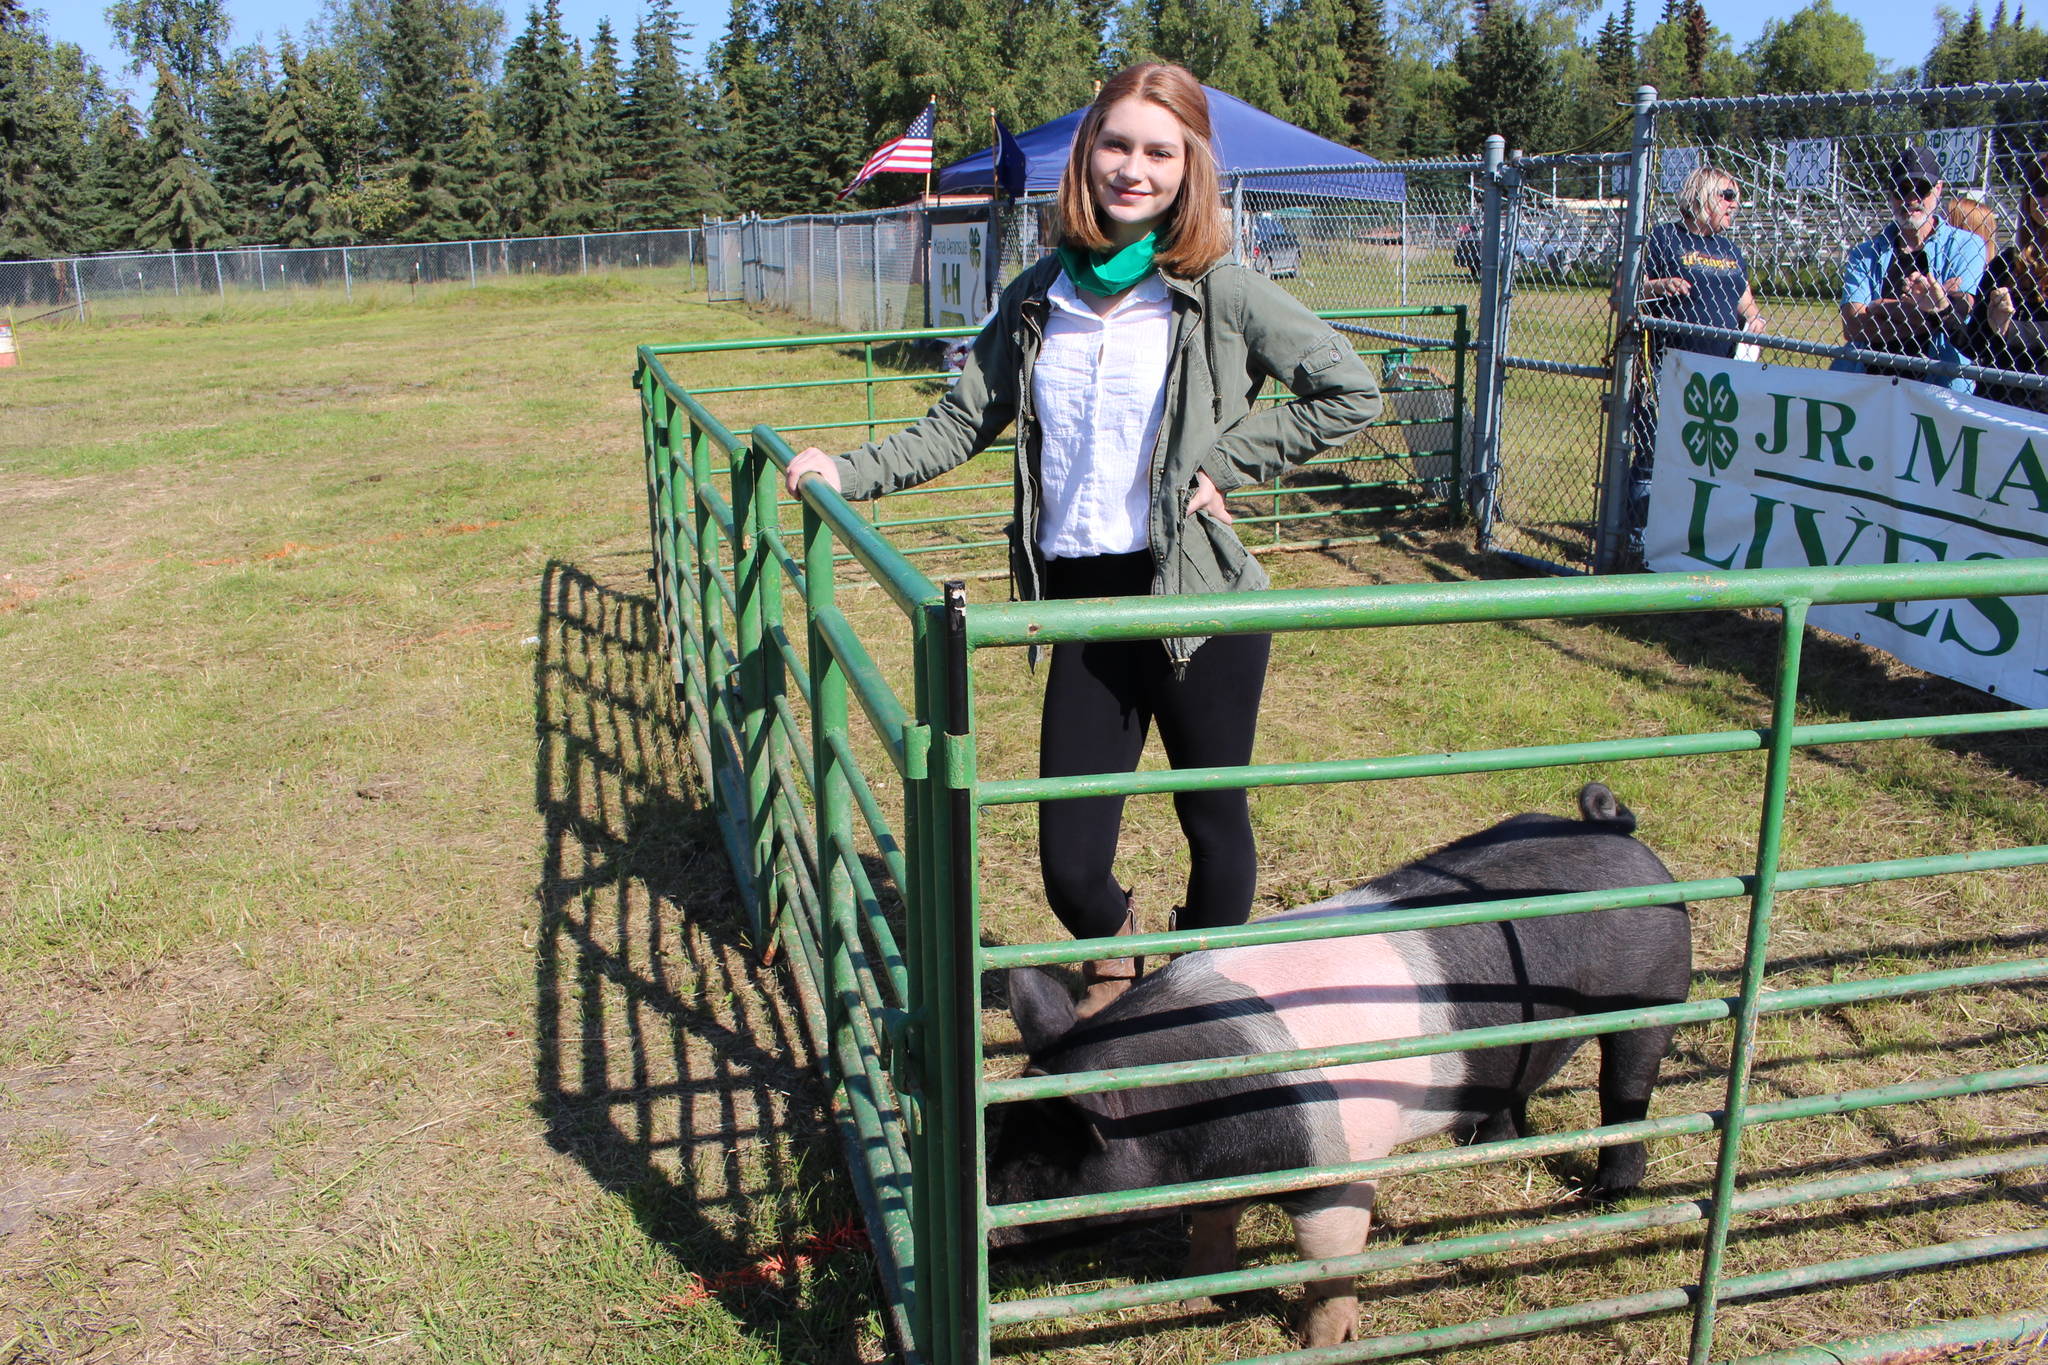 Destiny Martin and her pig, Outlaw, are seen here at the 4-H Junior Market Drive-in Auction at the Soldotna Rodeo Grounds on Aug. 15, 2020. (Photo by Brian Mazurek/Peninsula Clarion)